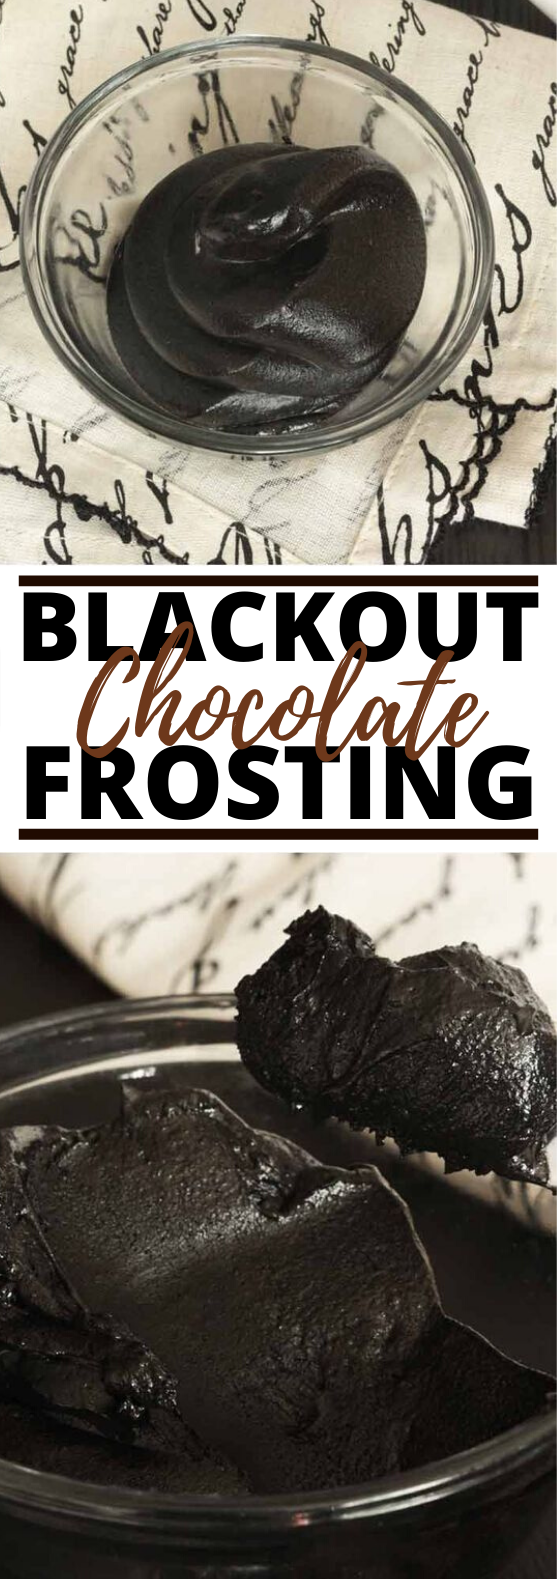 Blackout Chocolate Buttercream Frosting #cake #cookies #frosting #cupcakes #desserts